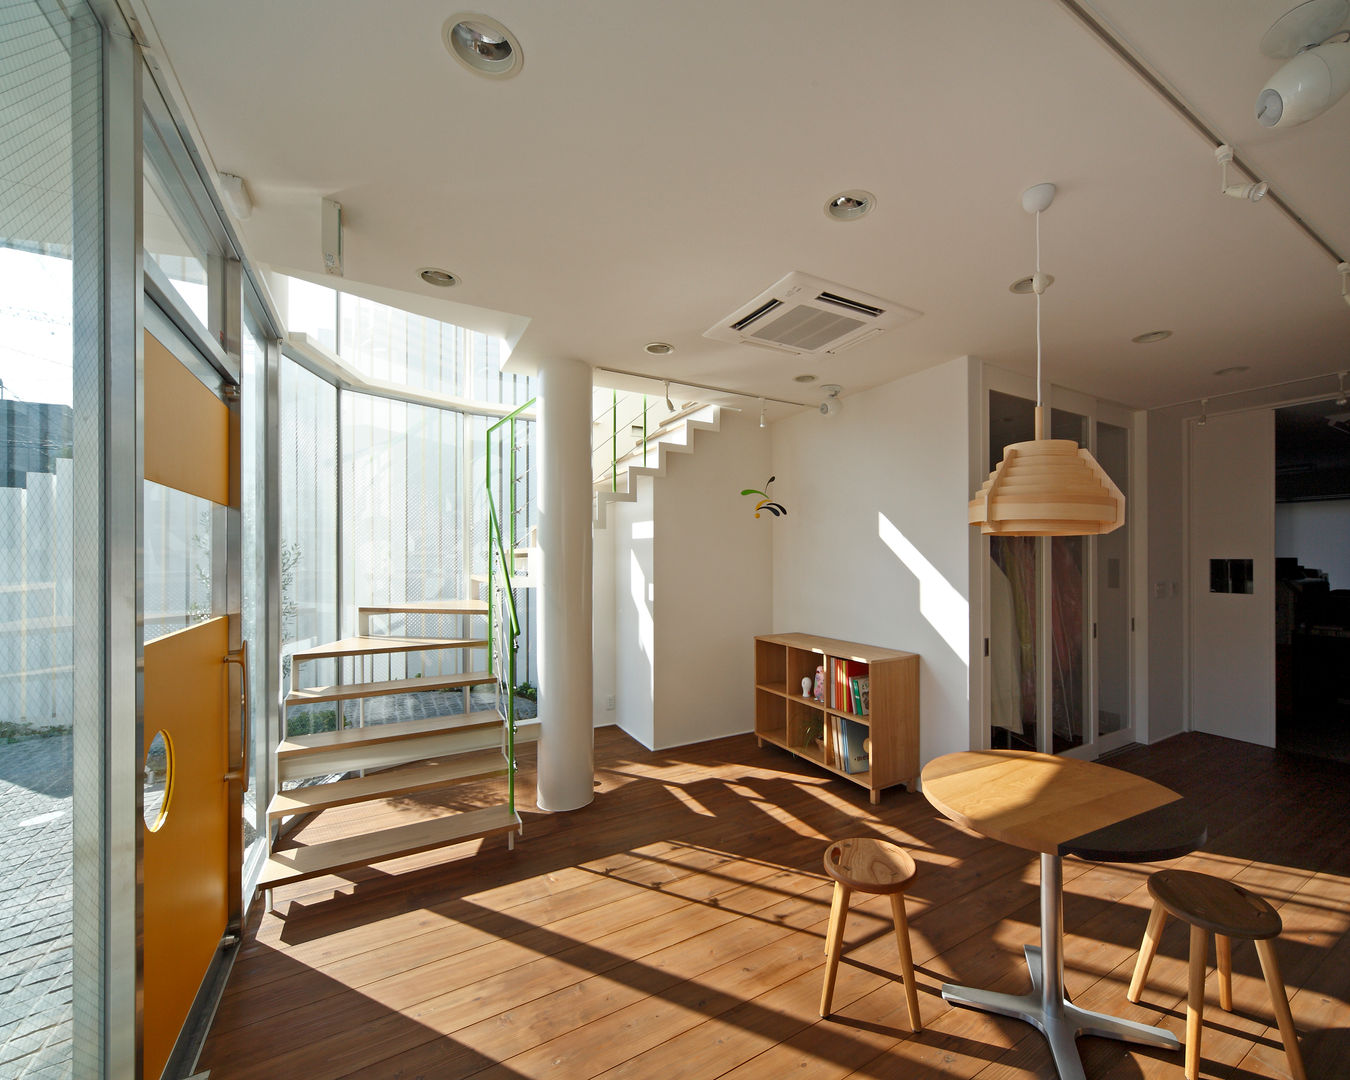 Kayashima Photo Studio Ohana, 一級建築士事務所アトリエｍ 一級建築士事務所アトリエｍ Commercial spaces Offices & stores